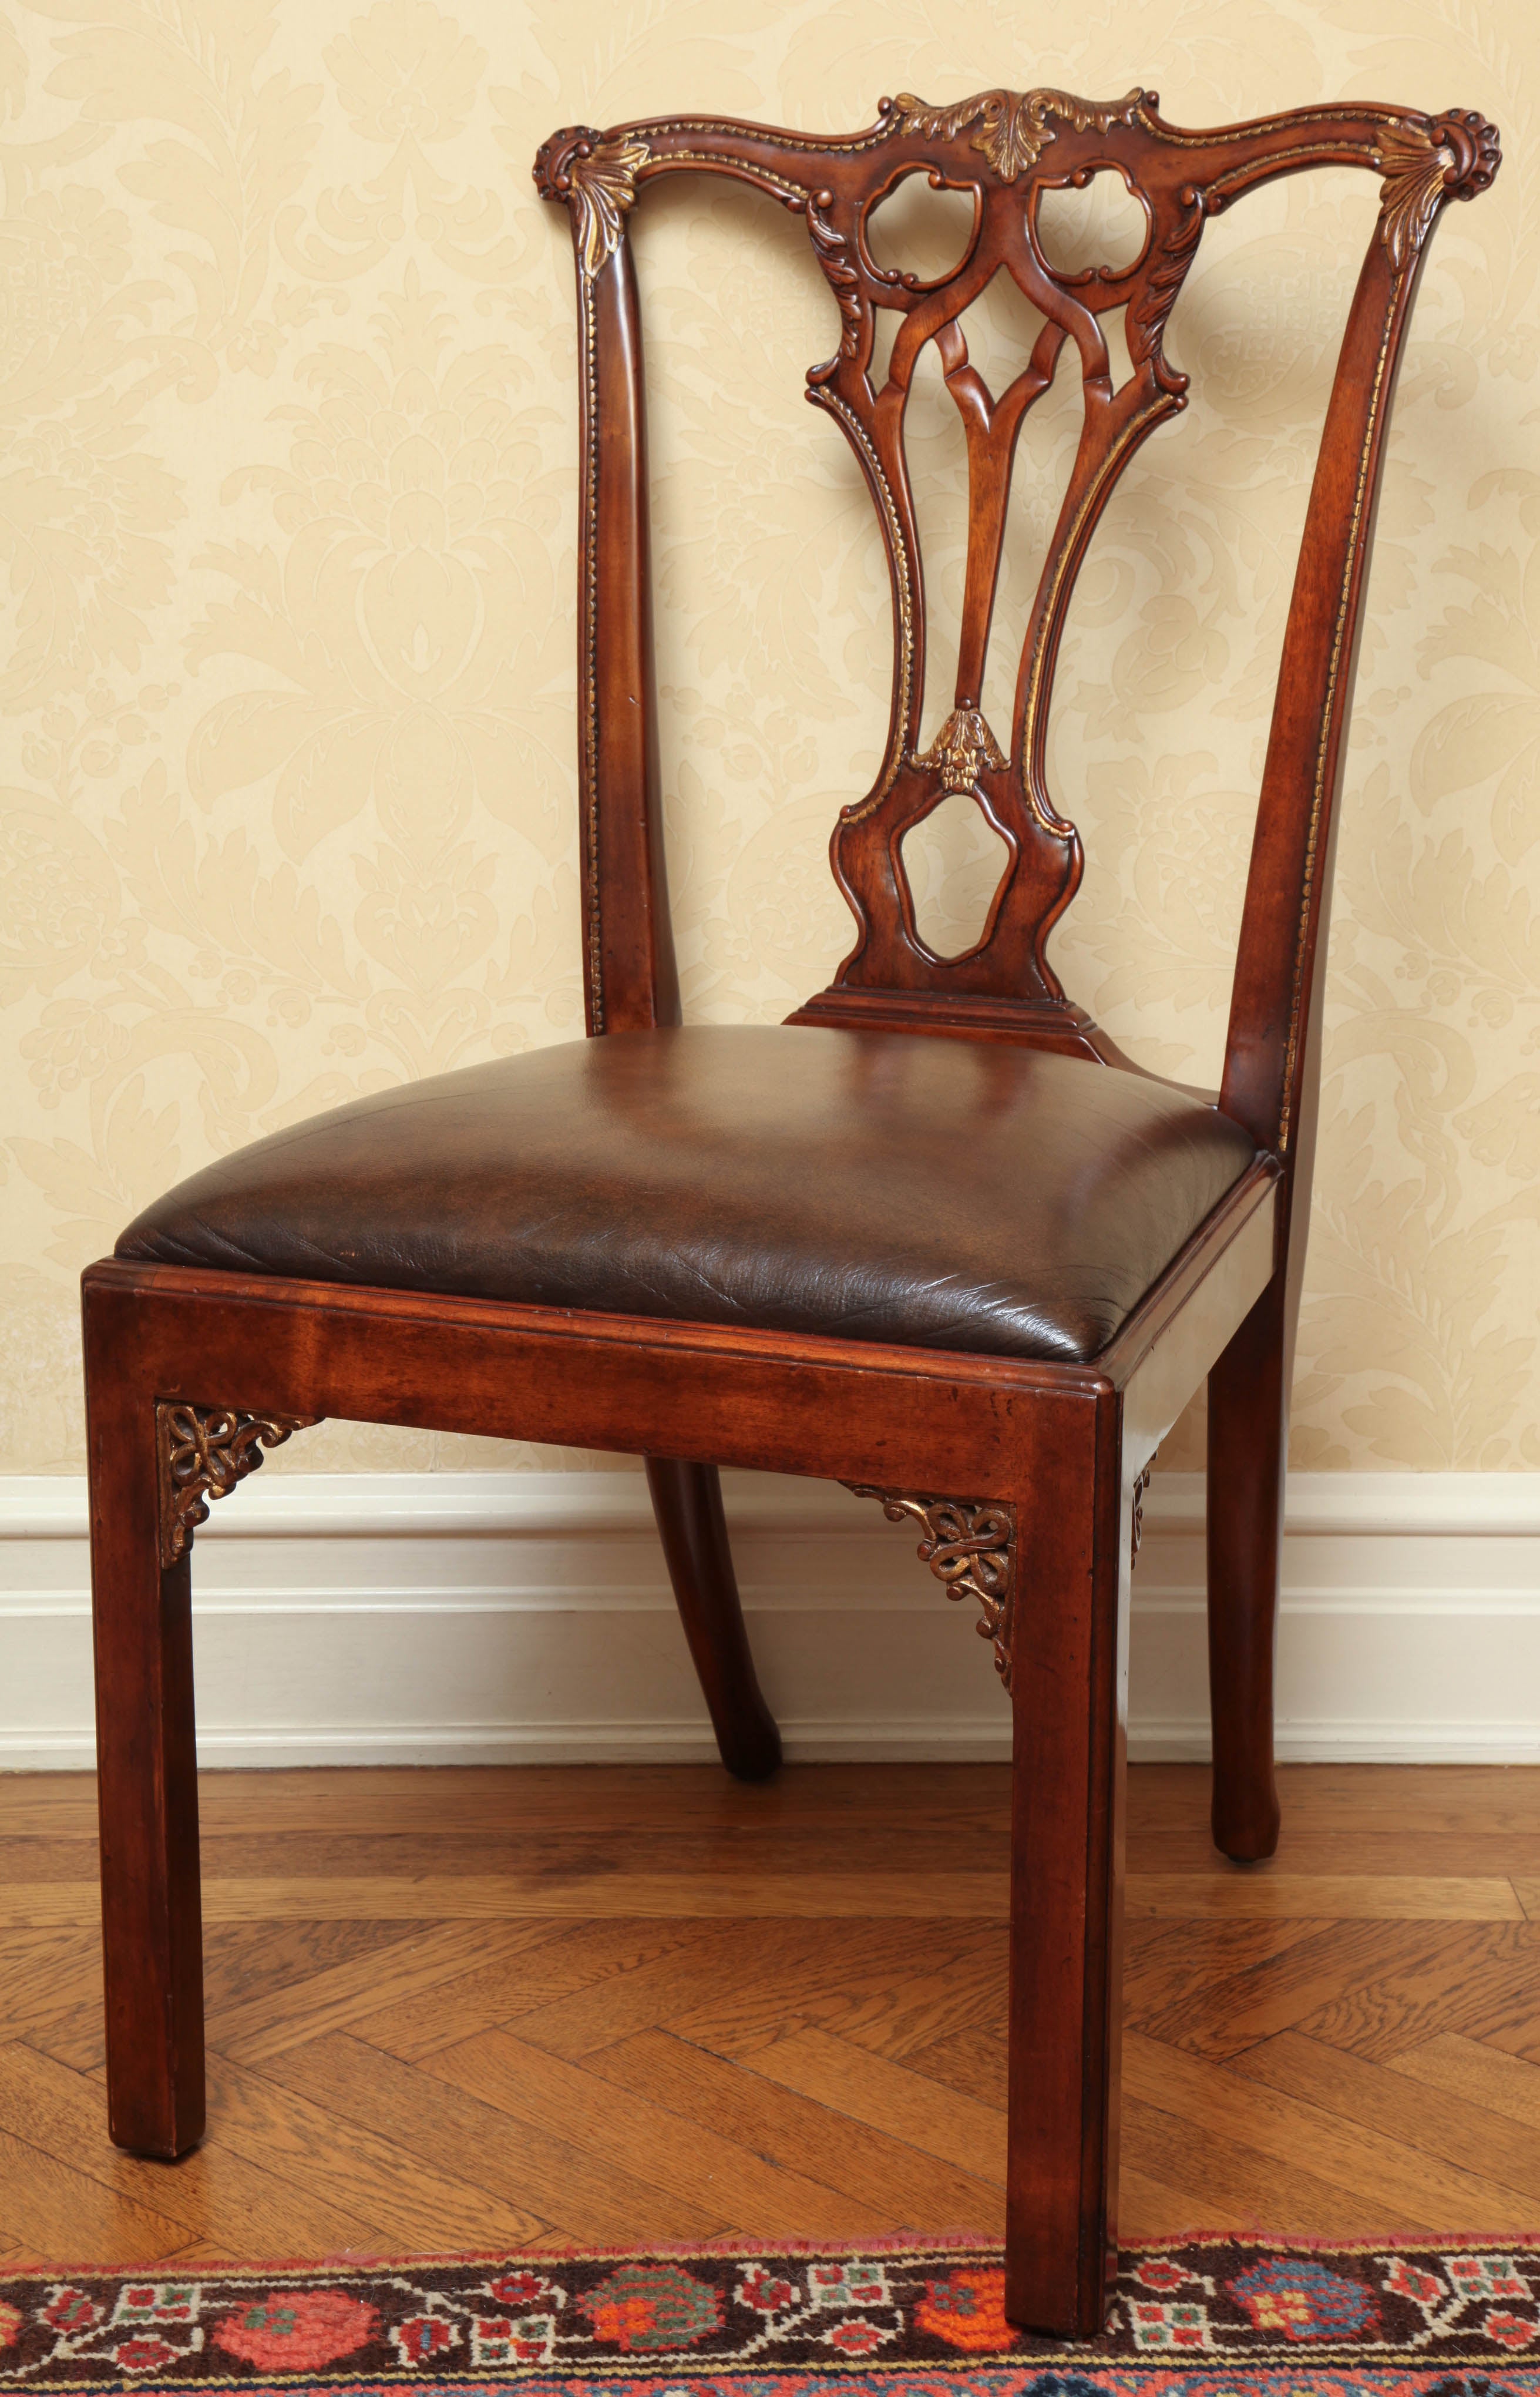 Each mahogany side chair after a period Chippendale design with parcel-gilt decoration and drop-in leather seat.